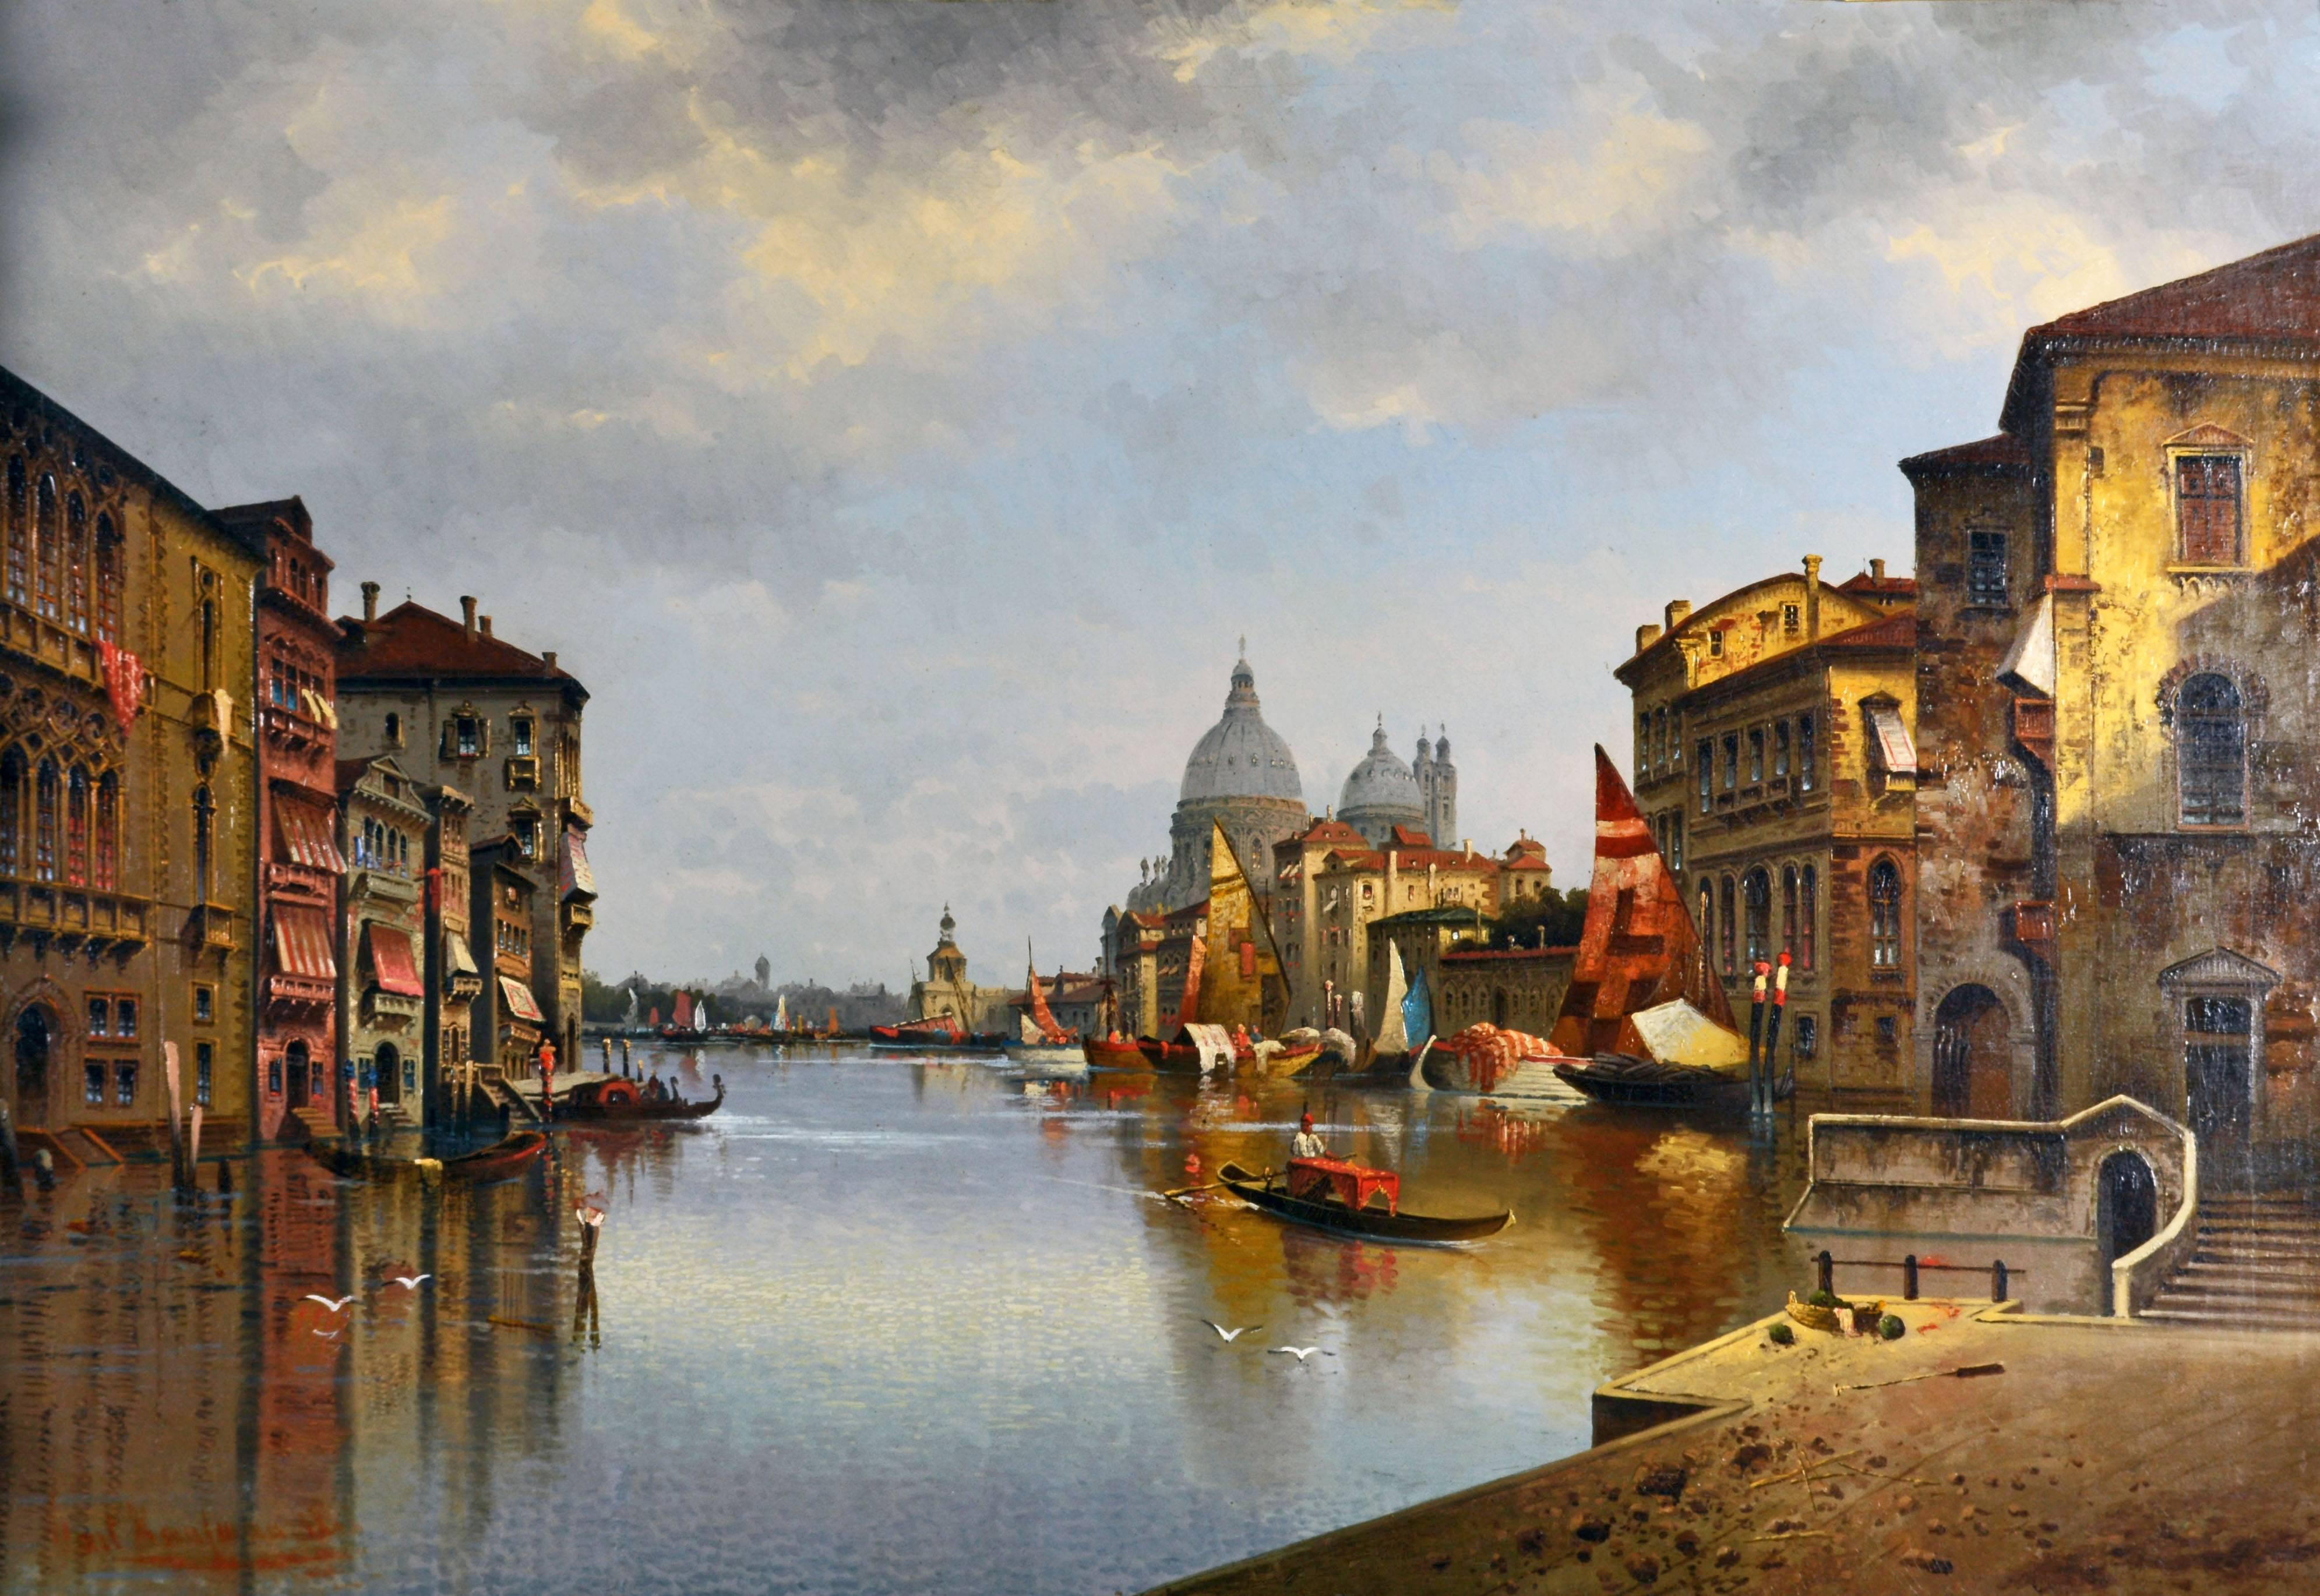 Measuring 53 x 84 inches including the antique ornate frame (38 x 56 without frame) this Classic Venice scene is impressive as well as superbly detailed. The colors are vivid and warm complimenting the Ambience of Venice which we all